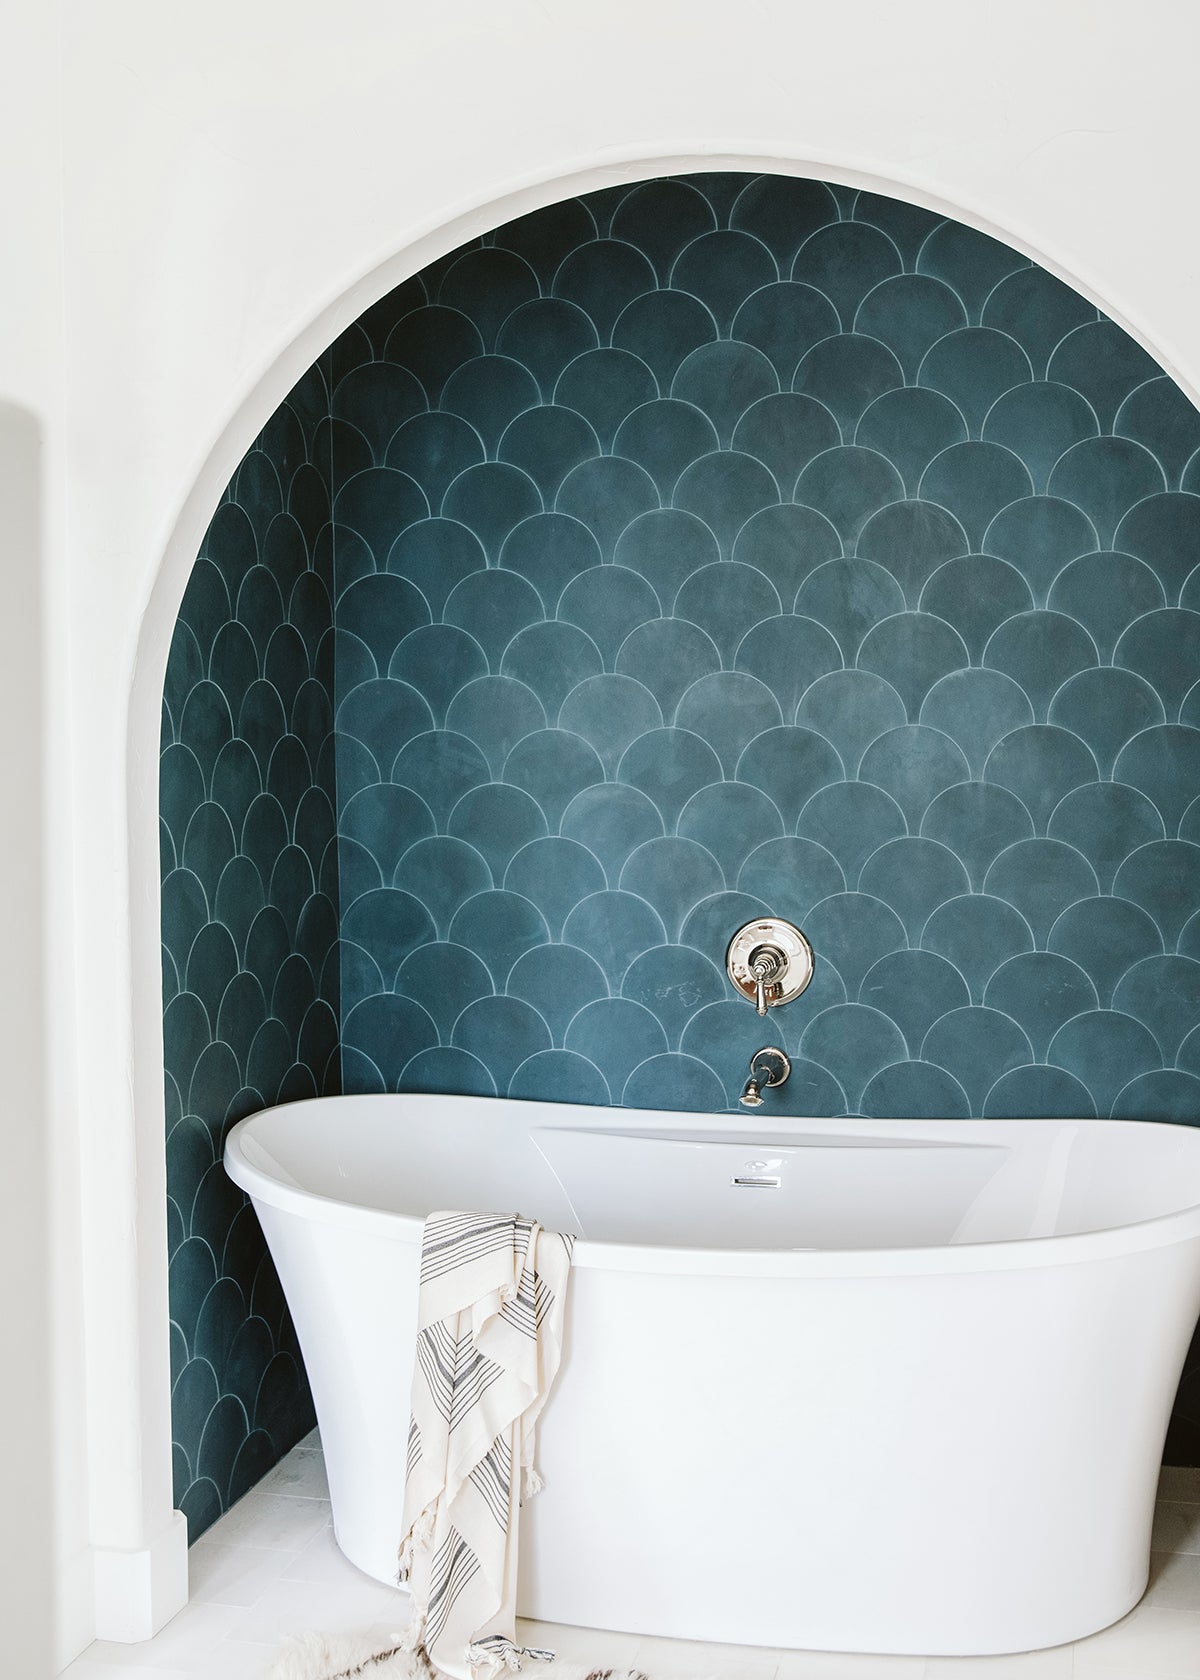 Standalone bathtub in an arched alcove in turquoise clé scalloped tiles.